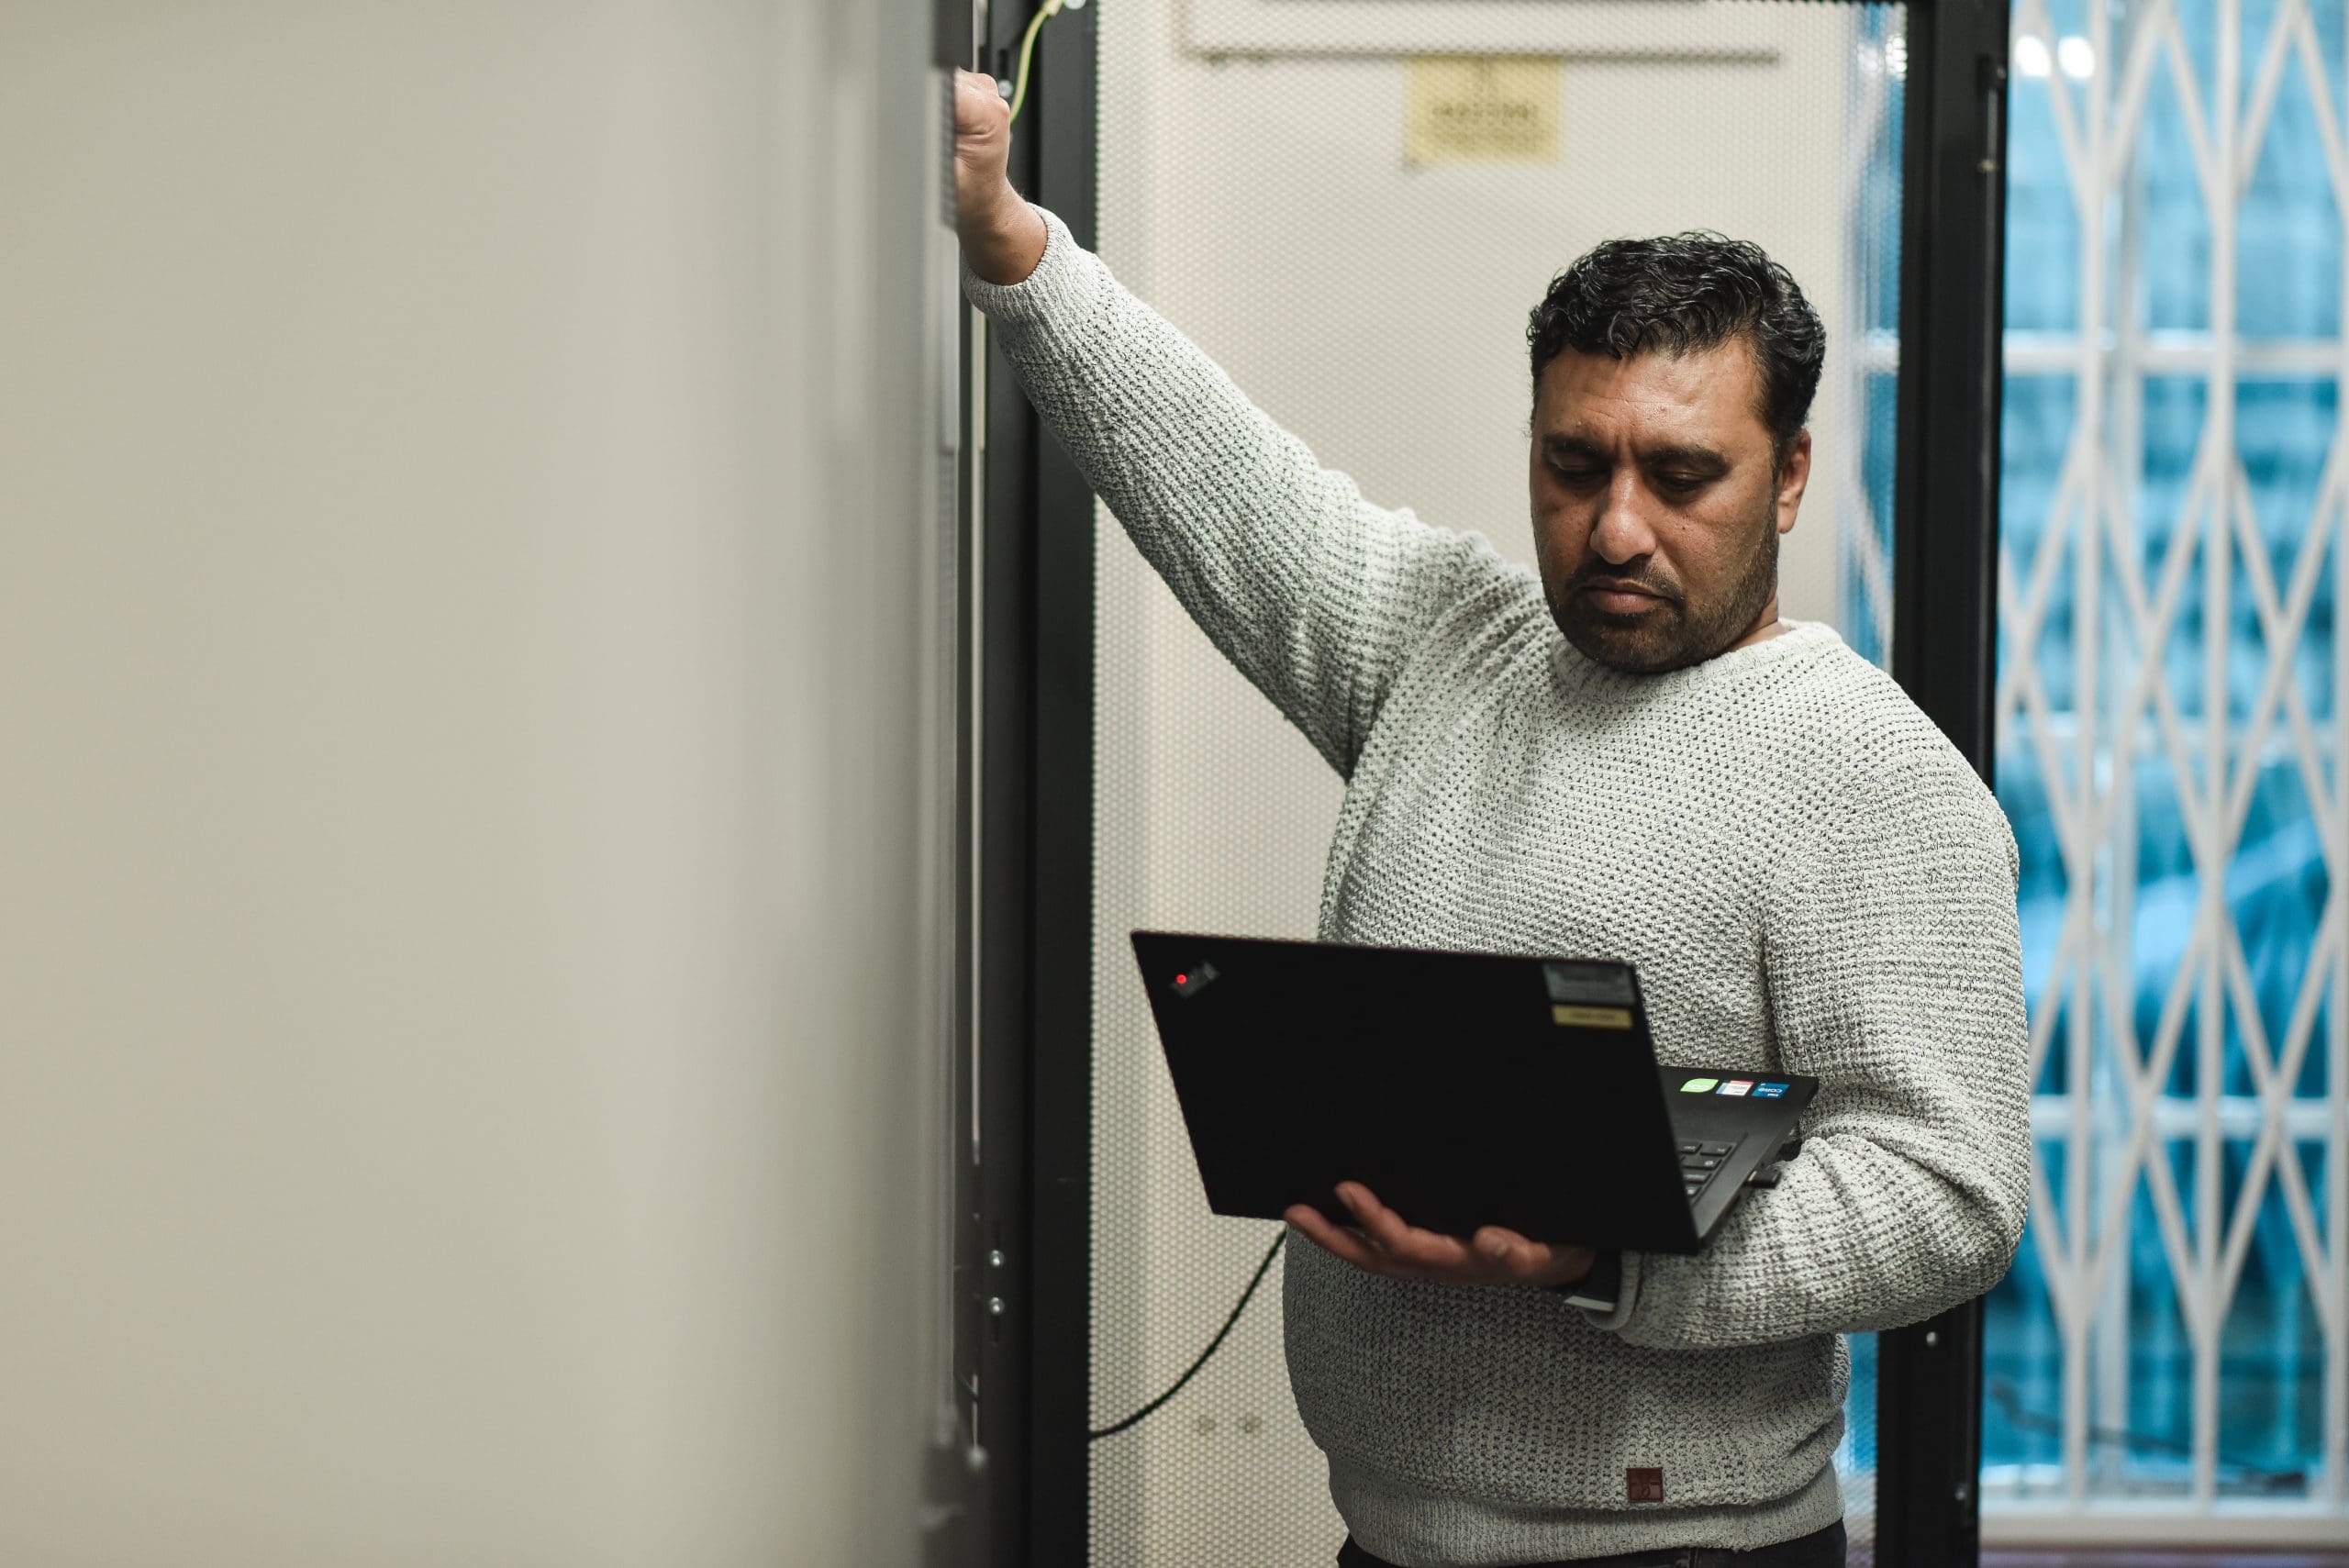 Cantium employee working in the data centre with servers and their laptop.